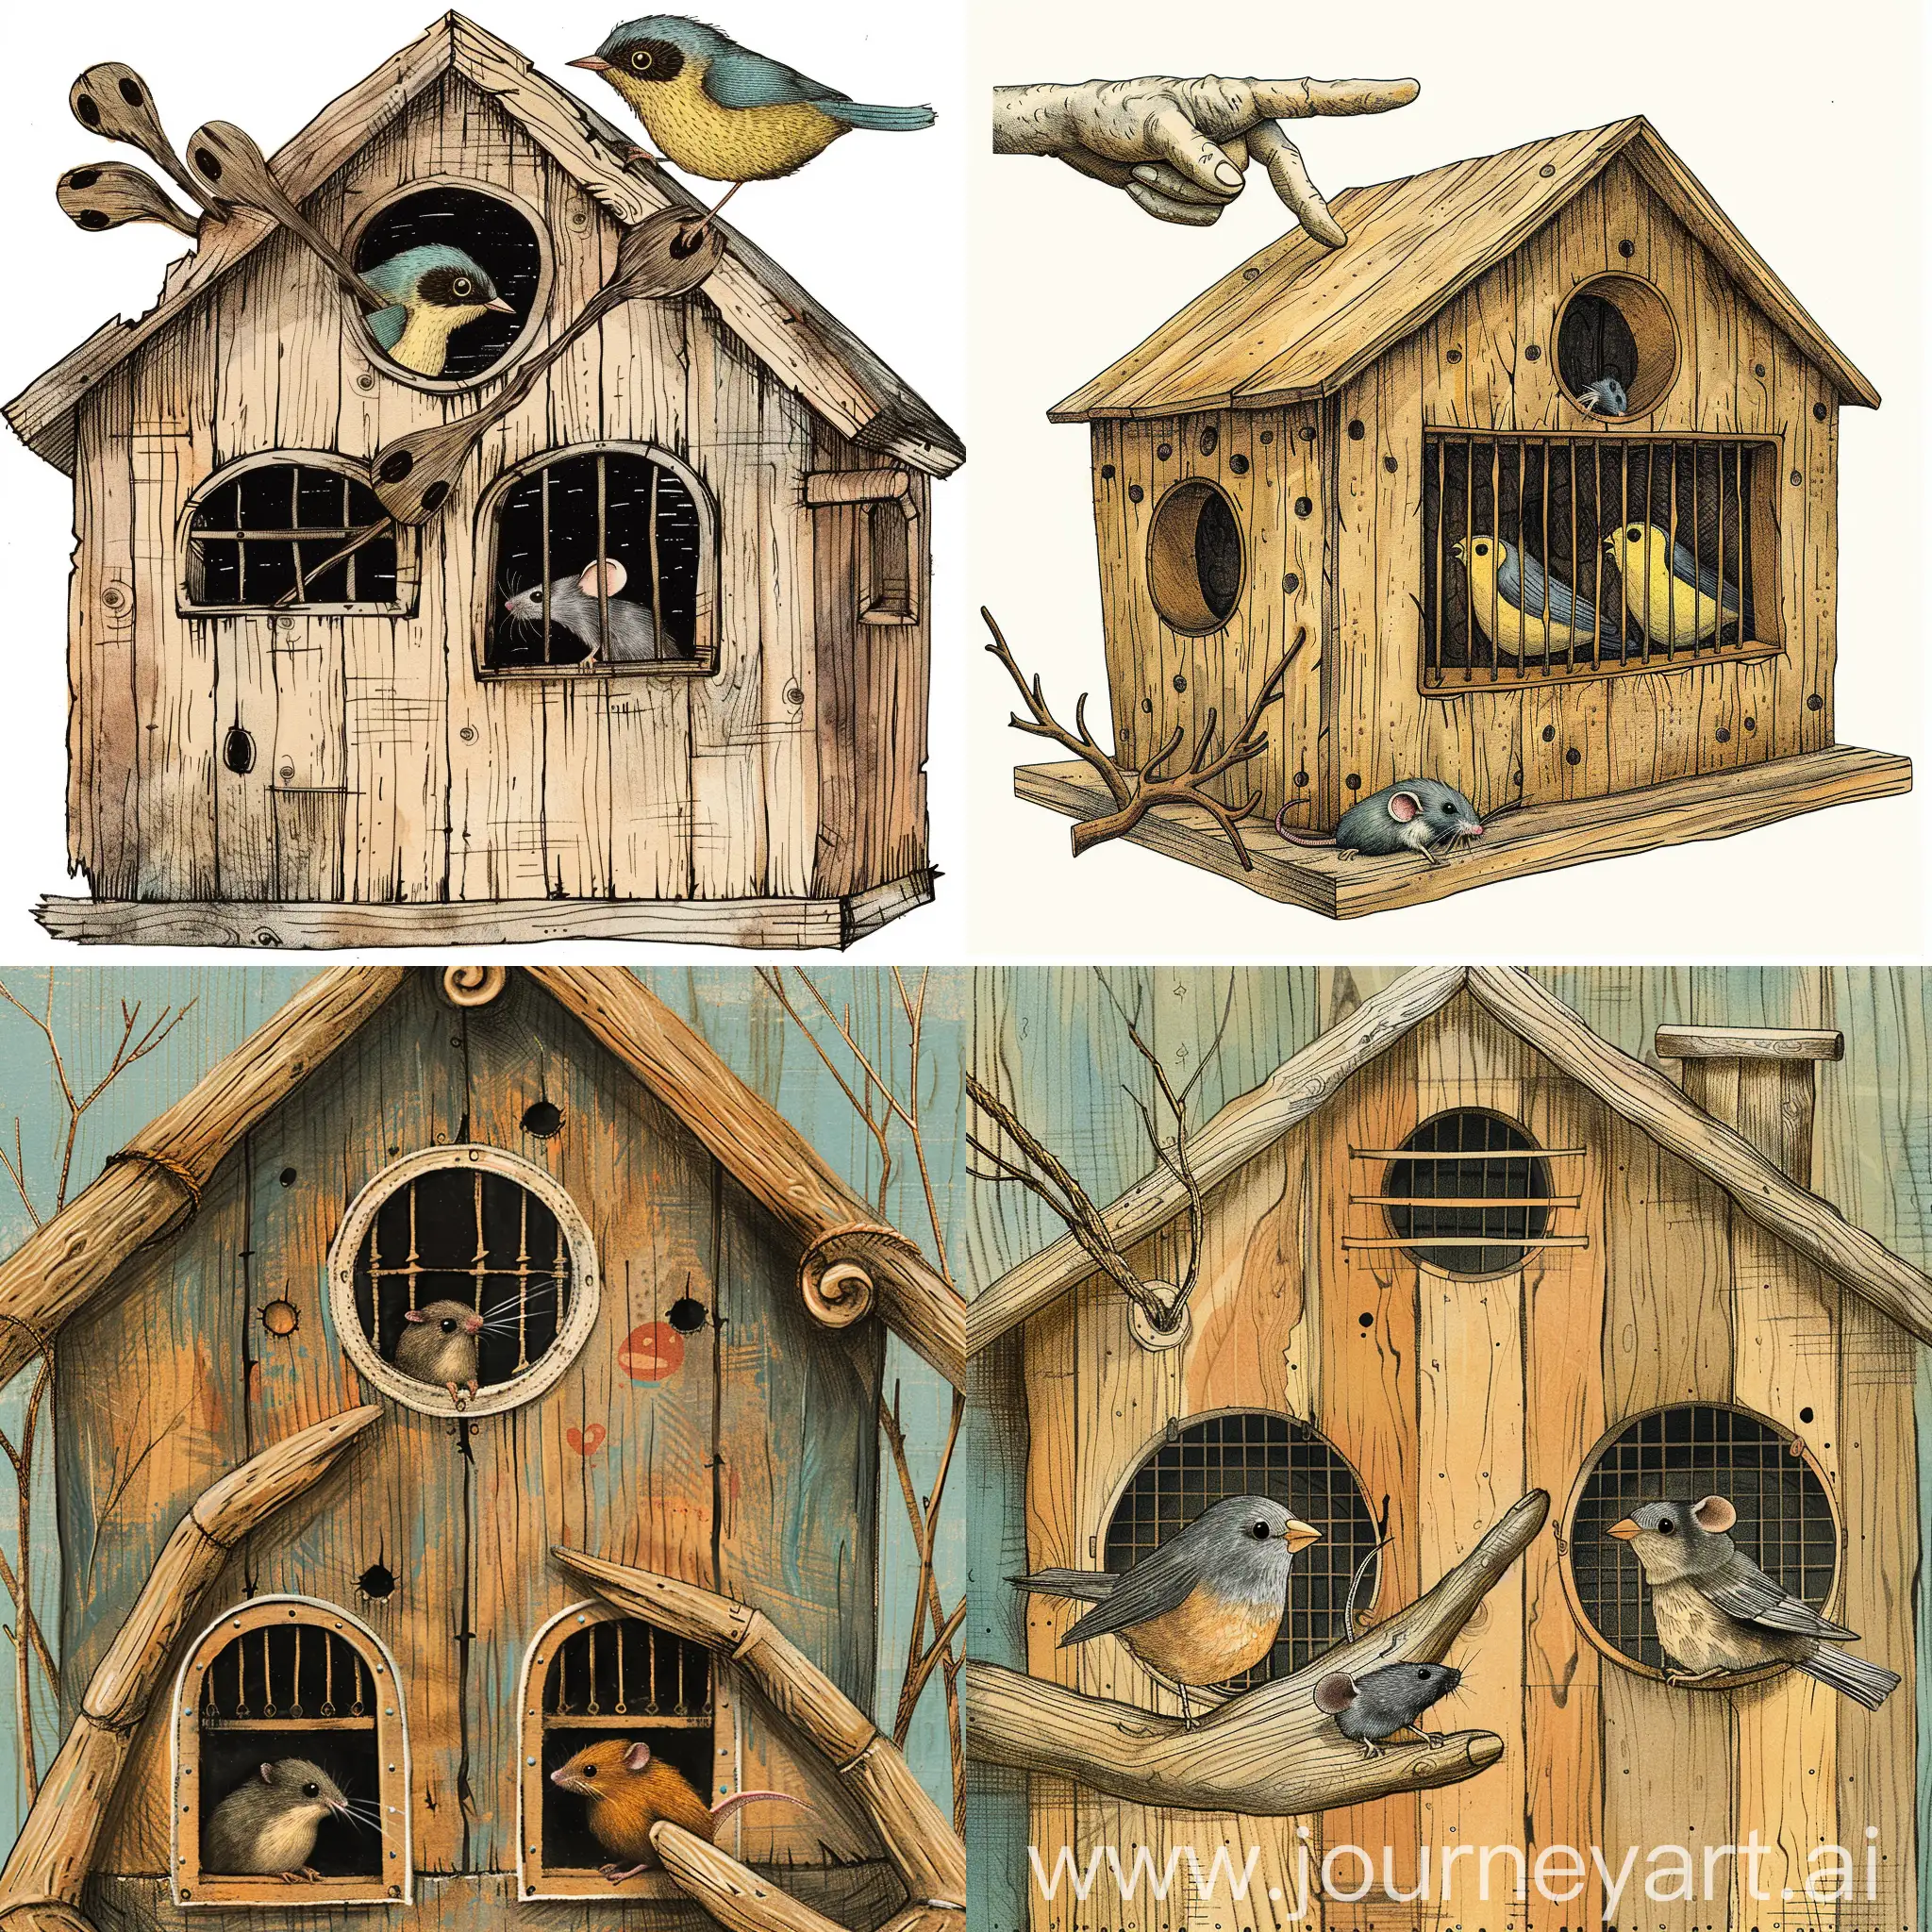 House-shaped birdcage made of wood with vintage twig hands, windows and holes、Two birds are peeking out of the holes, outside stands ((small rat)). Twig hand pointing to mouse (focus), simple image pattern、Hand drawn, Easter colors, abstract, cheerful, whimsical, funny, children's storybook style